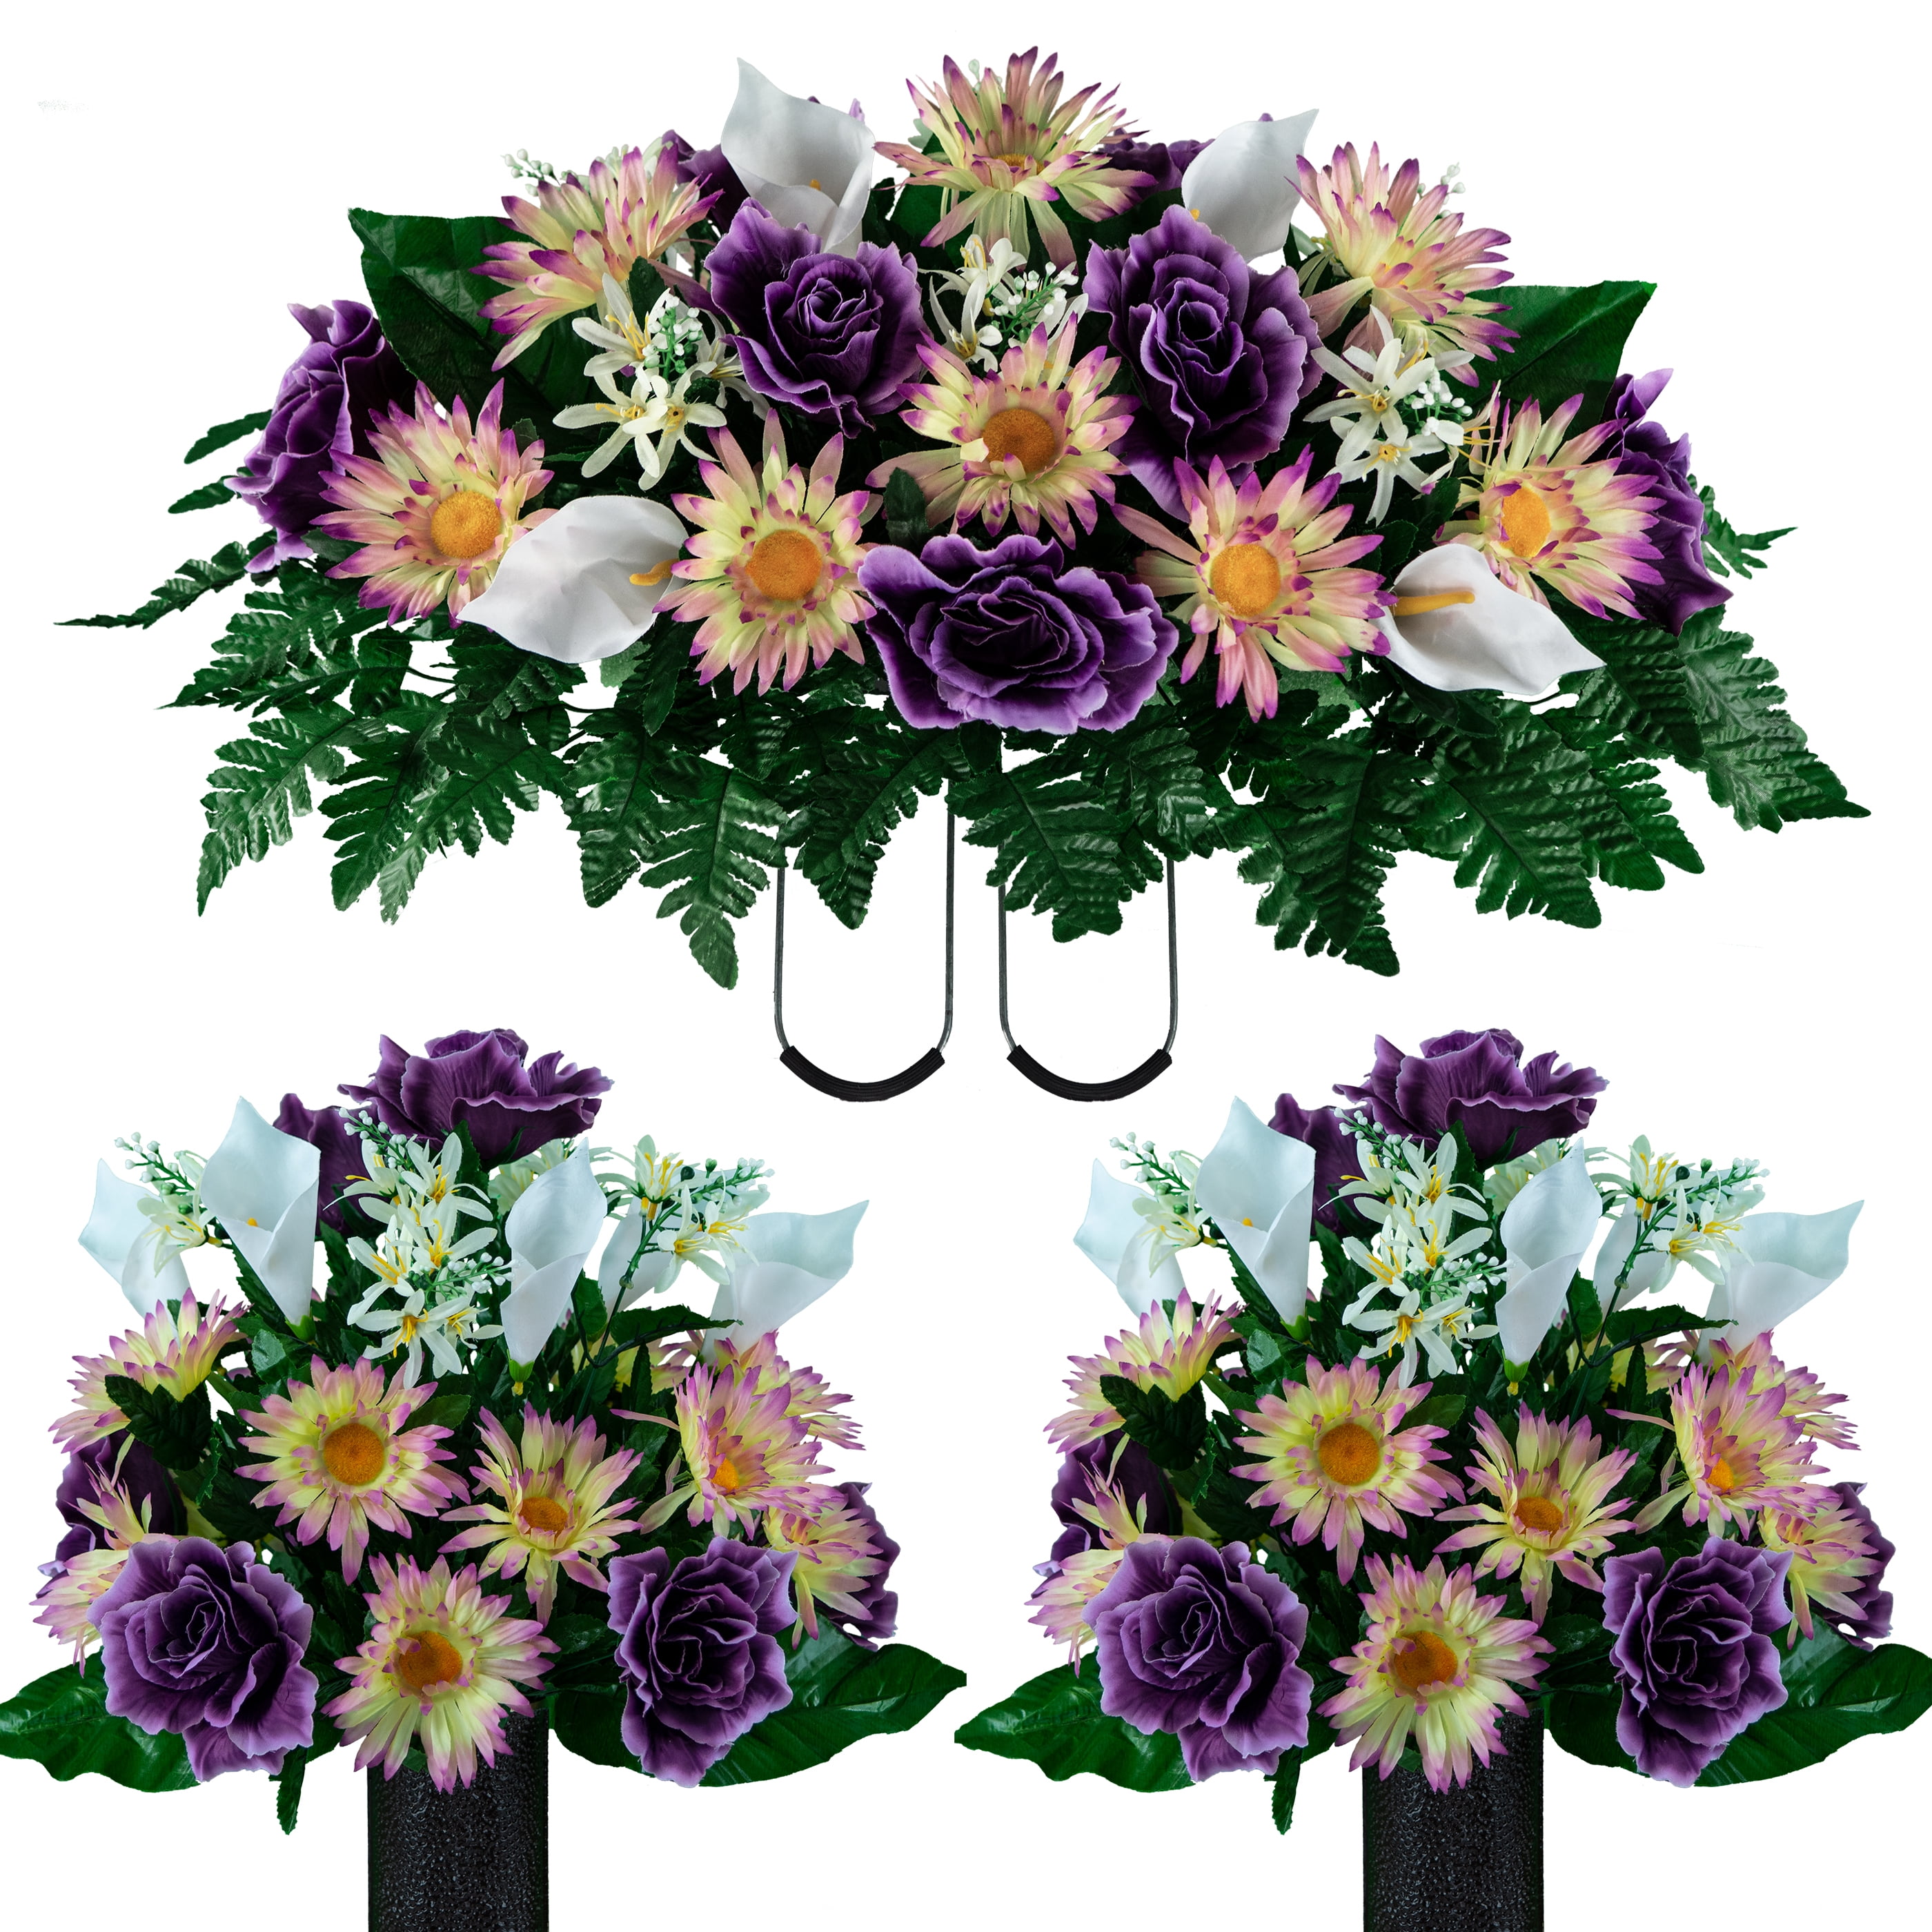 Sympathy Silks Artificial Cemetery Flowers - Realistic - Outdoor Grave